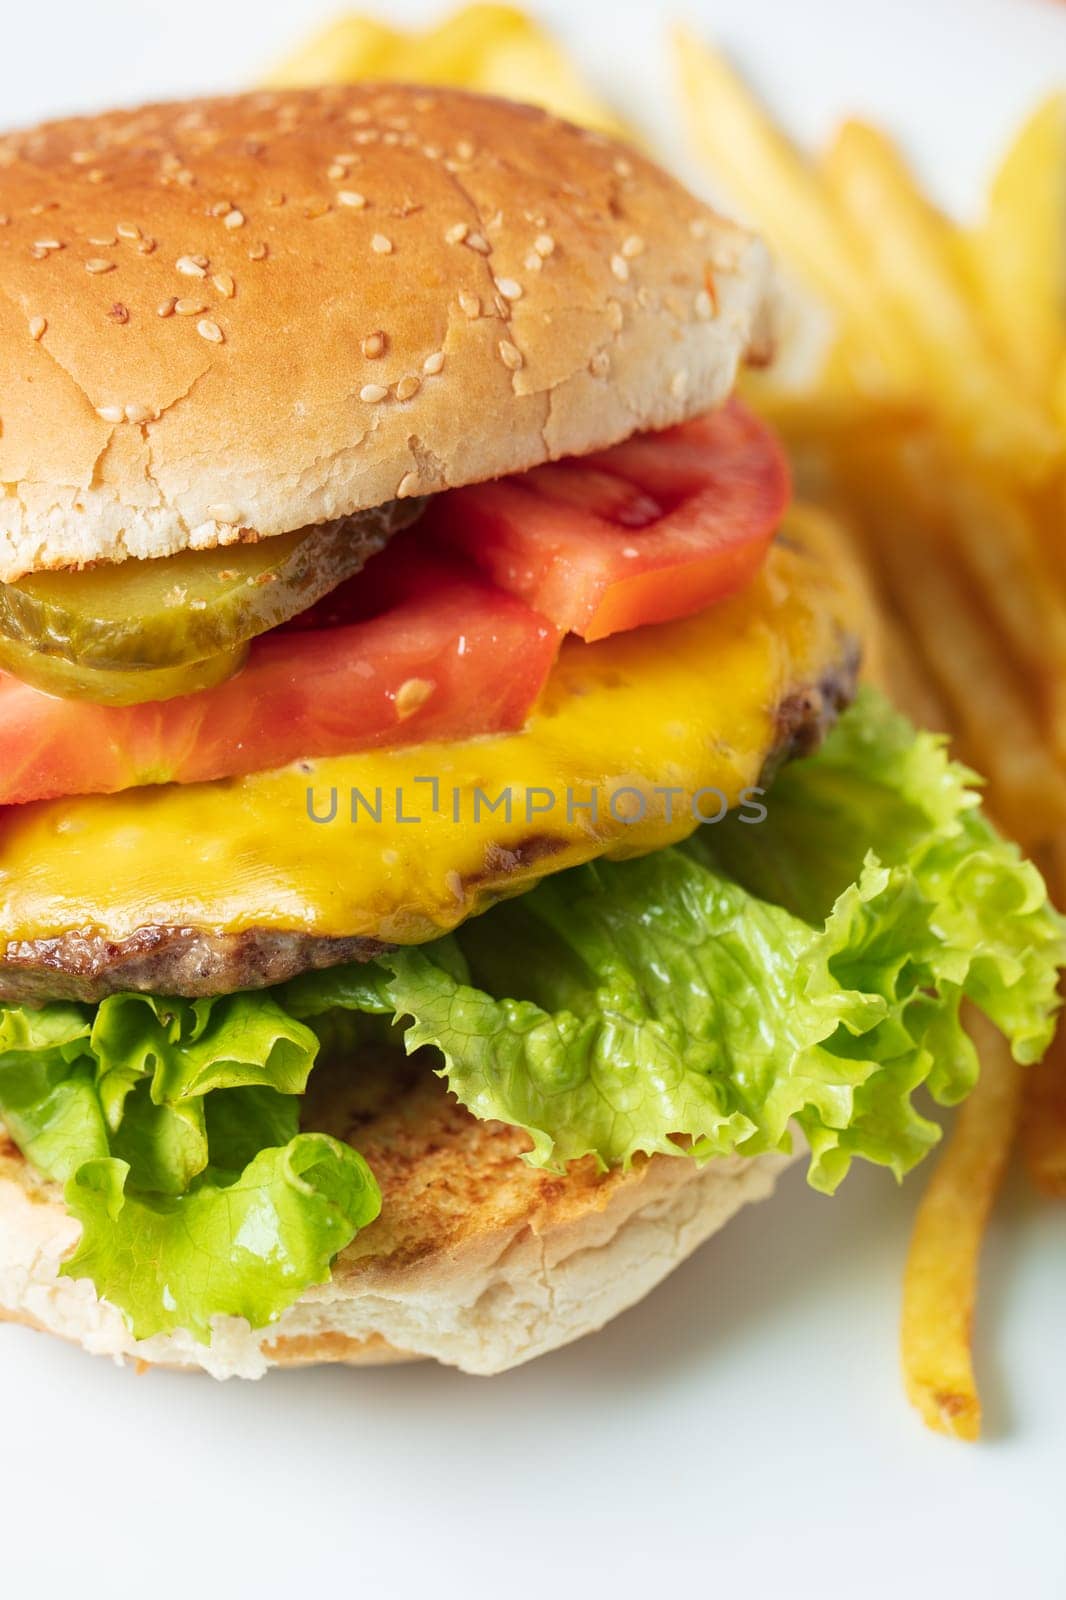 Cheeseburger with tomato and lettuce by senkaya